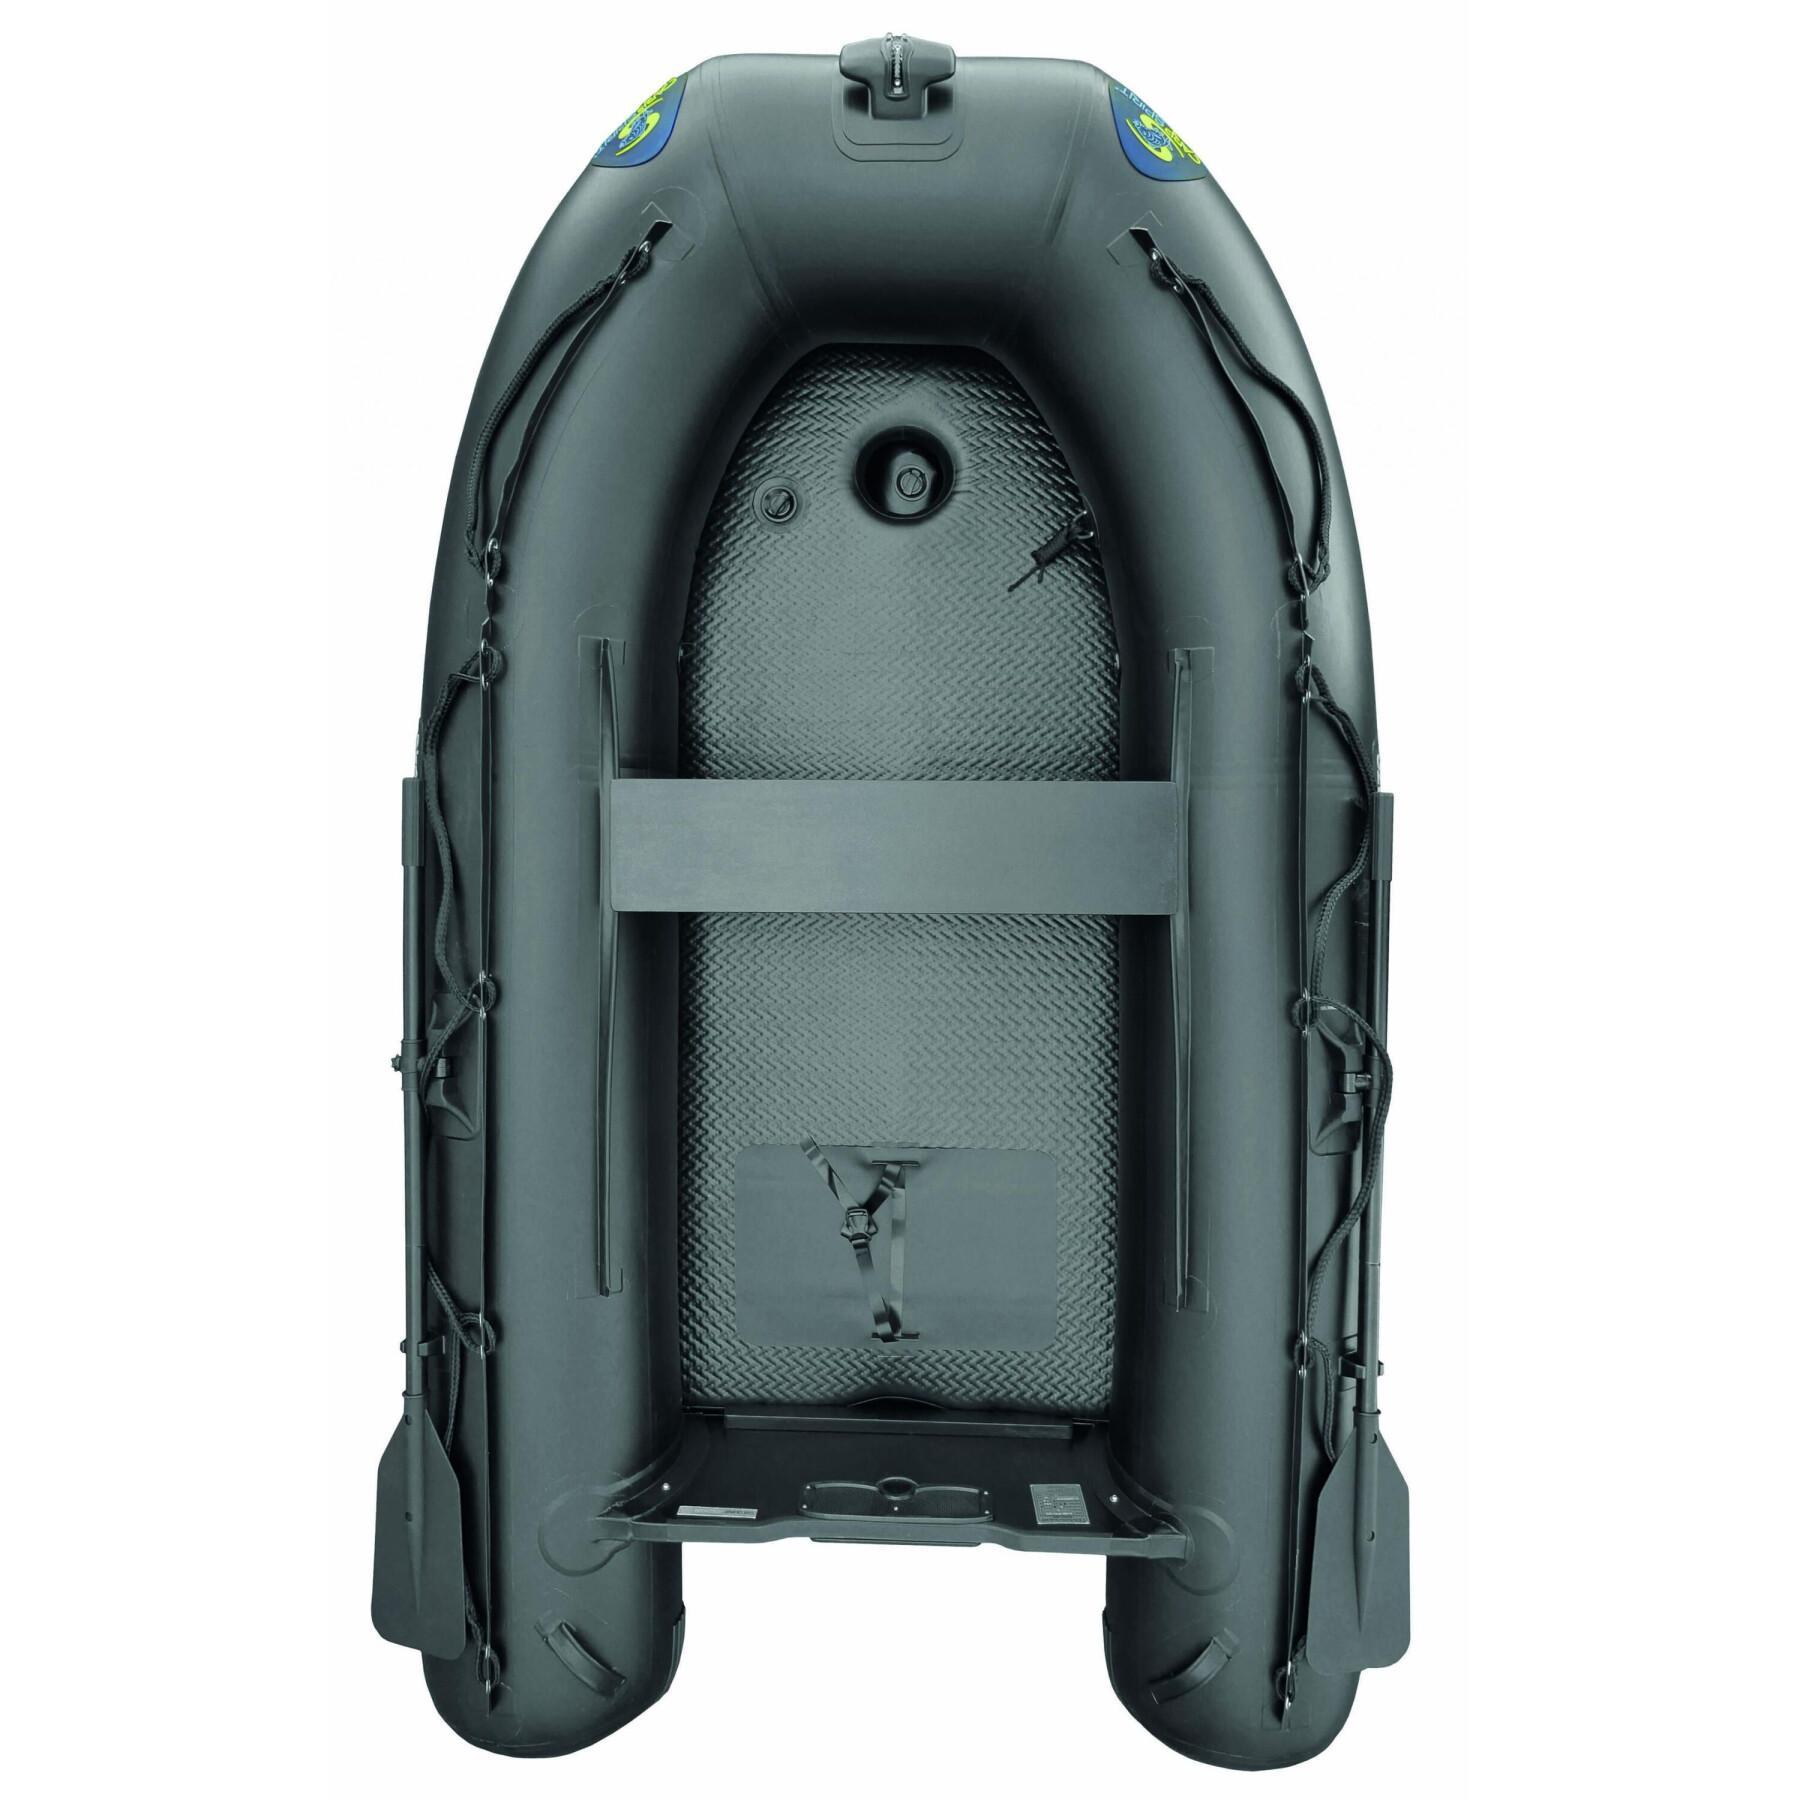 Barco inflable Carp Spirit 270WI